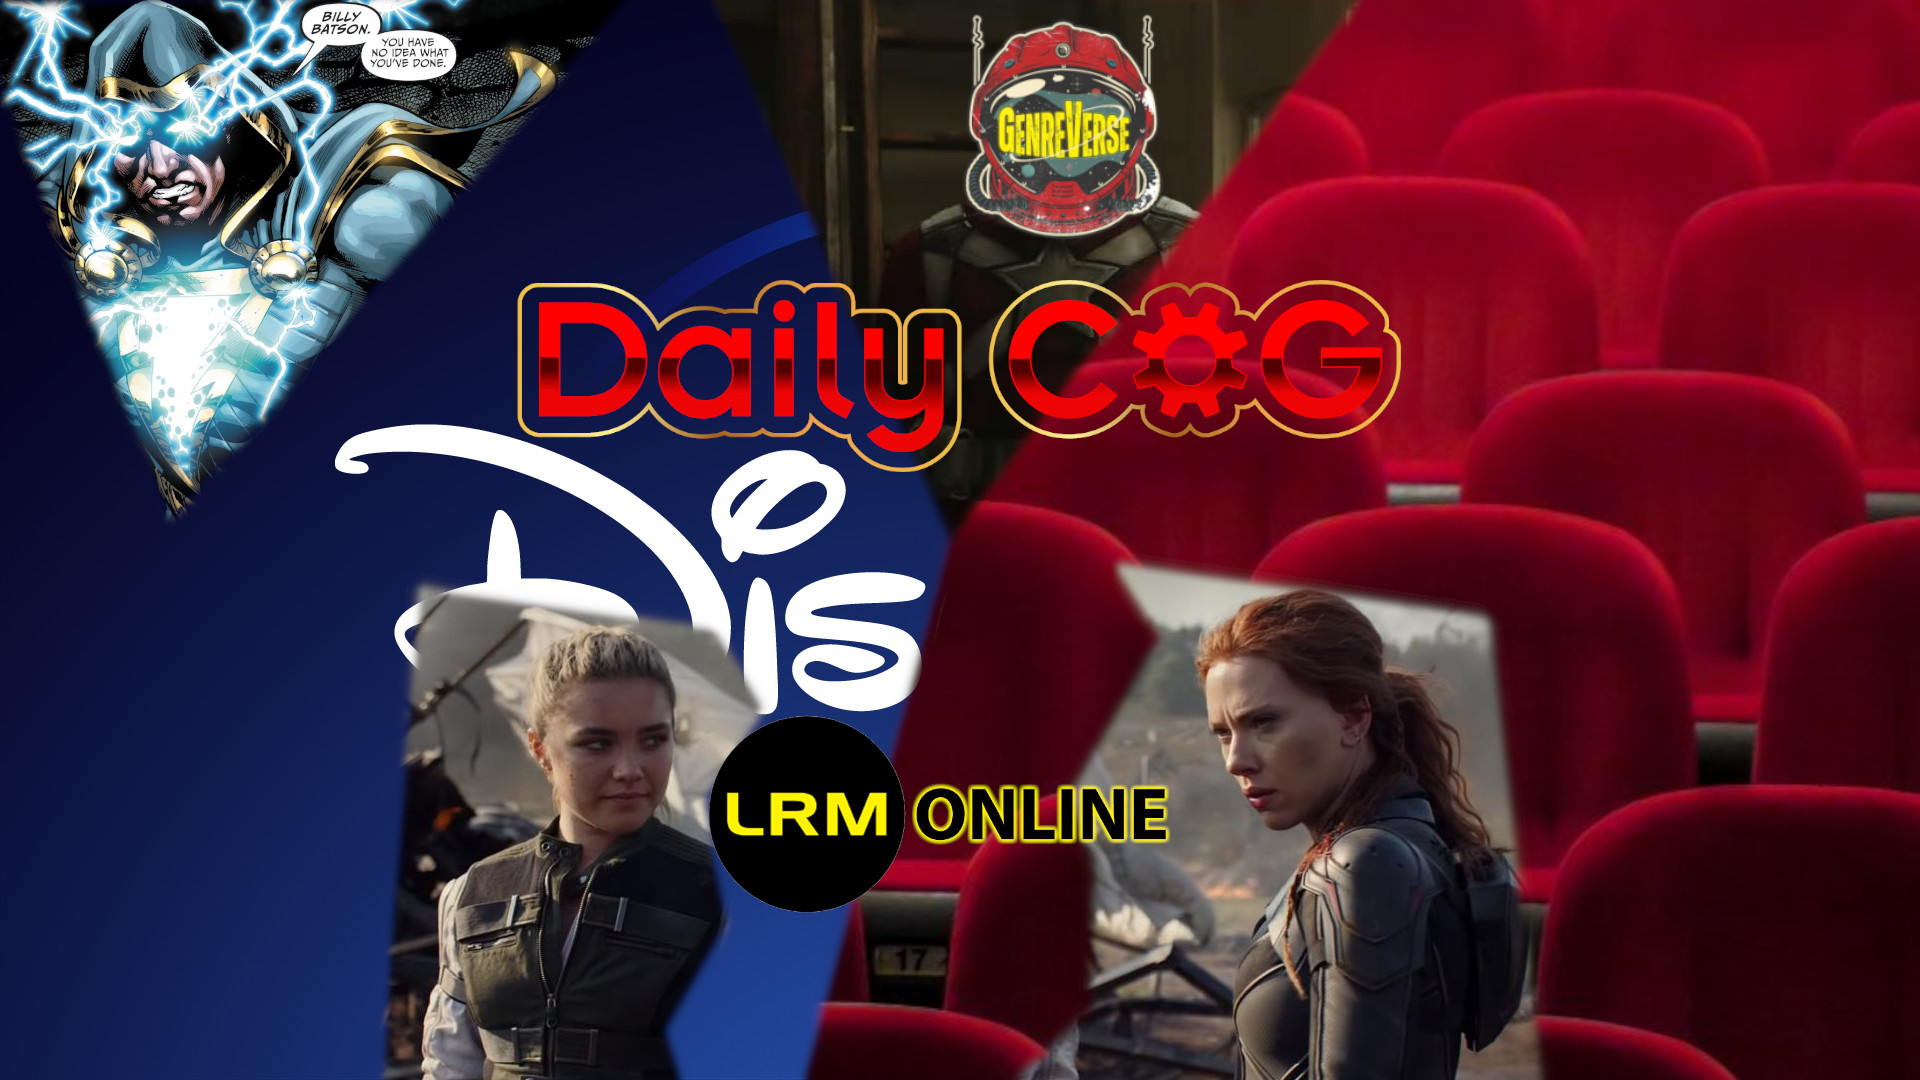 Black Widow Box Office Report To Be Spun Into Oblivion & New Black Adam Costume Picture From The Rock | Daily COG